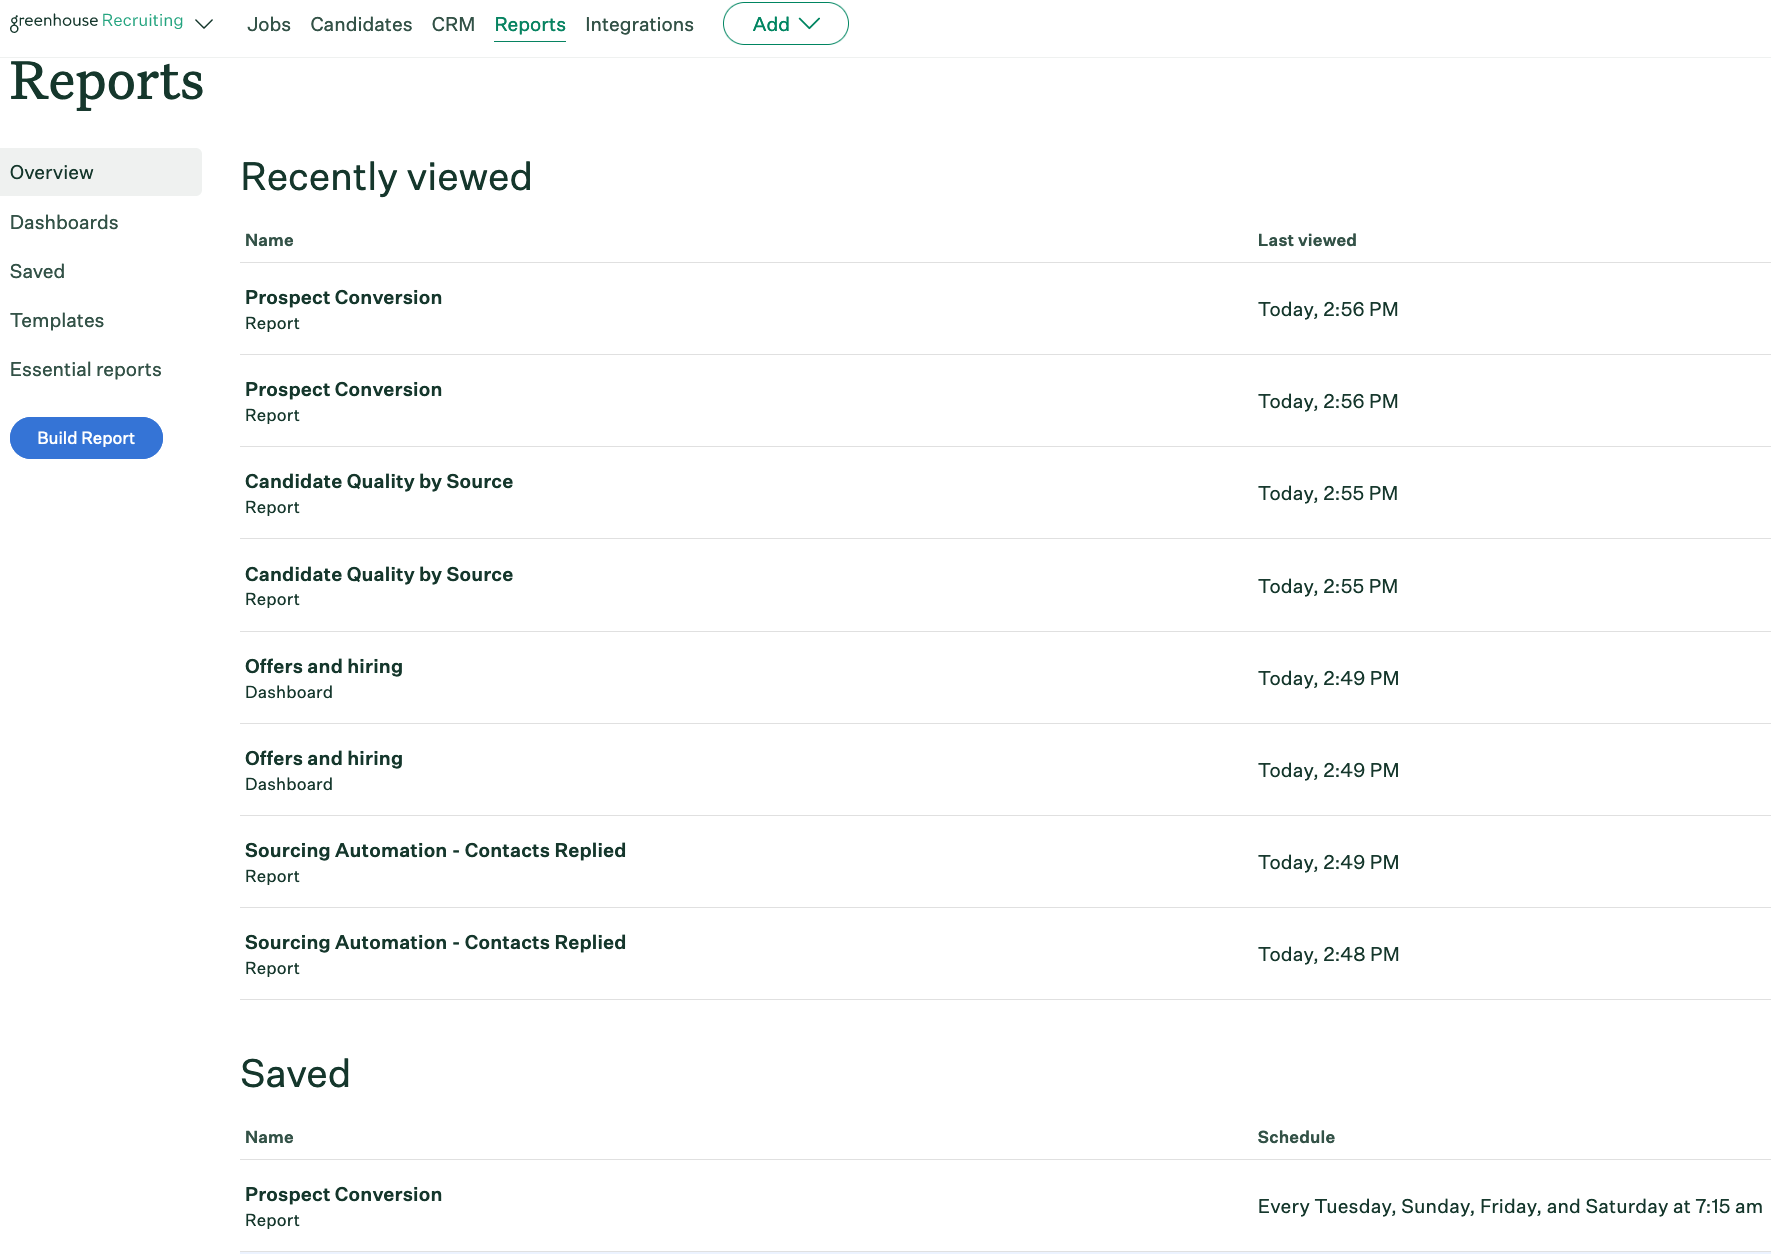 Screenshot of the reports overview tab